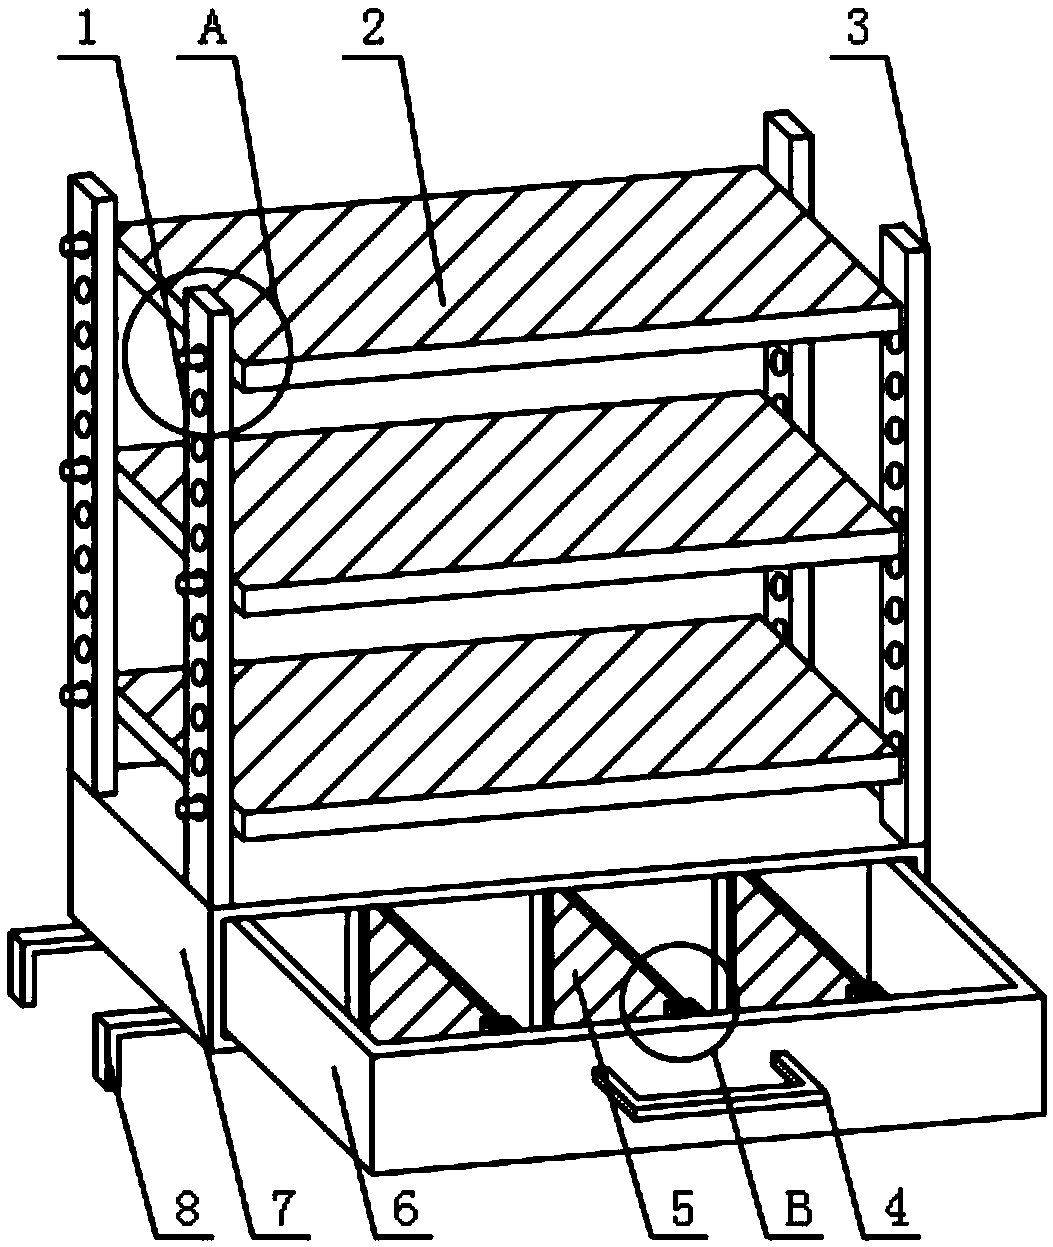 High stability express placement device